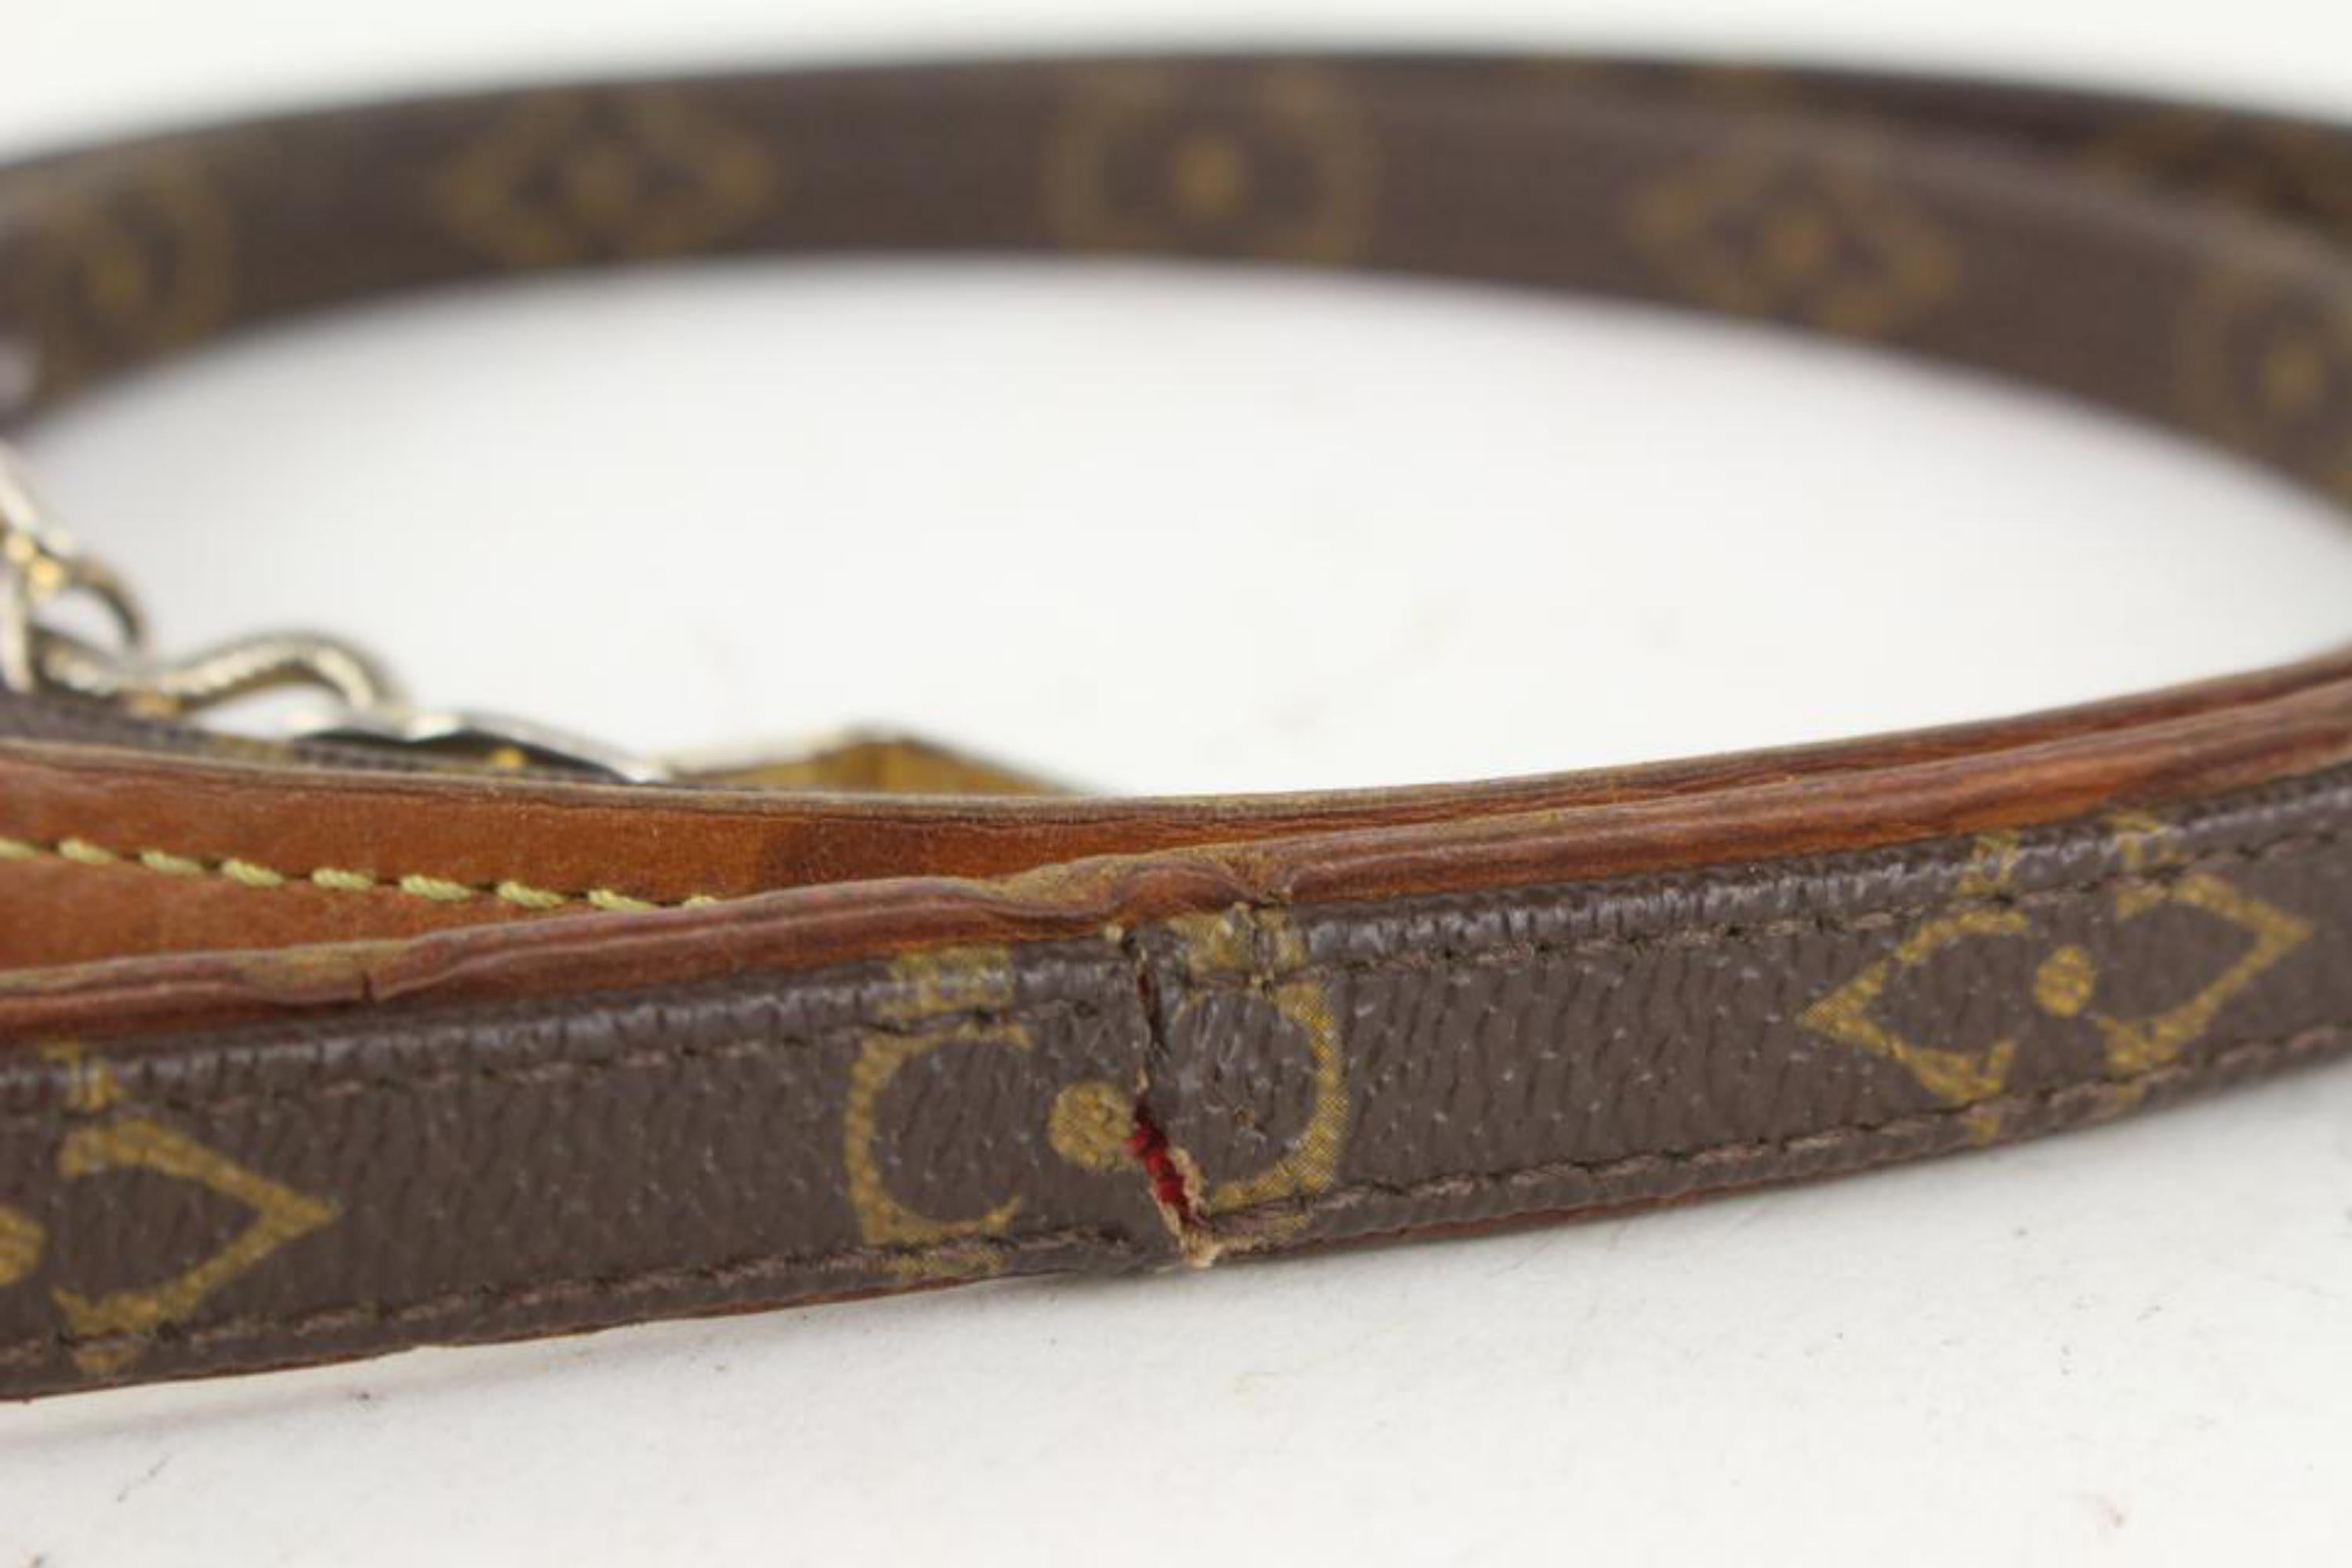 Louis Vuitton Monogram Baxter Leash 1020lv41 In Fair Condition For Sale In Dix hills, NY